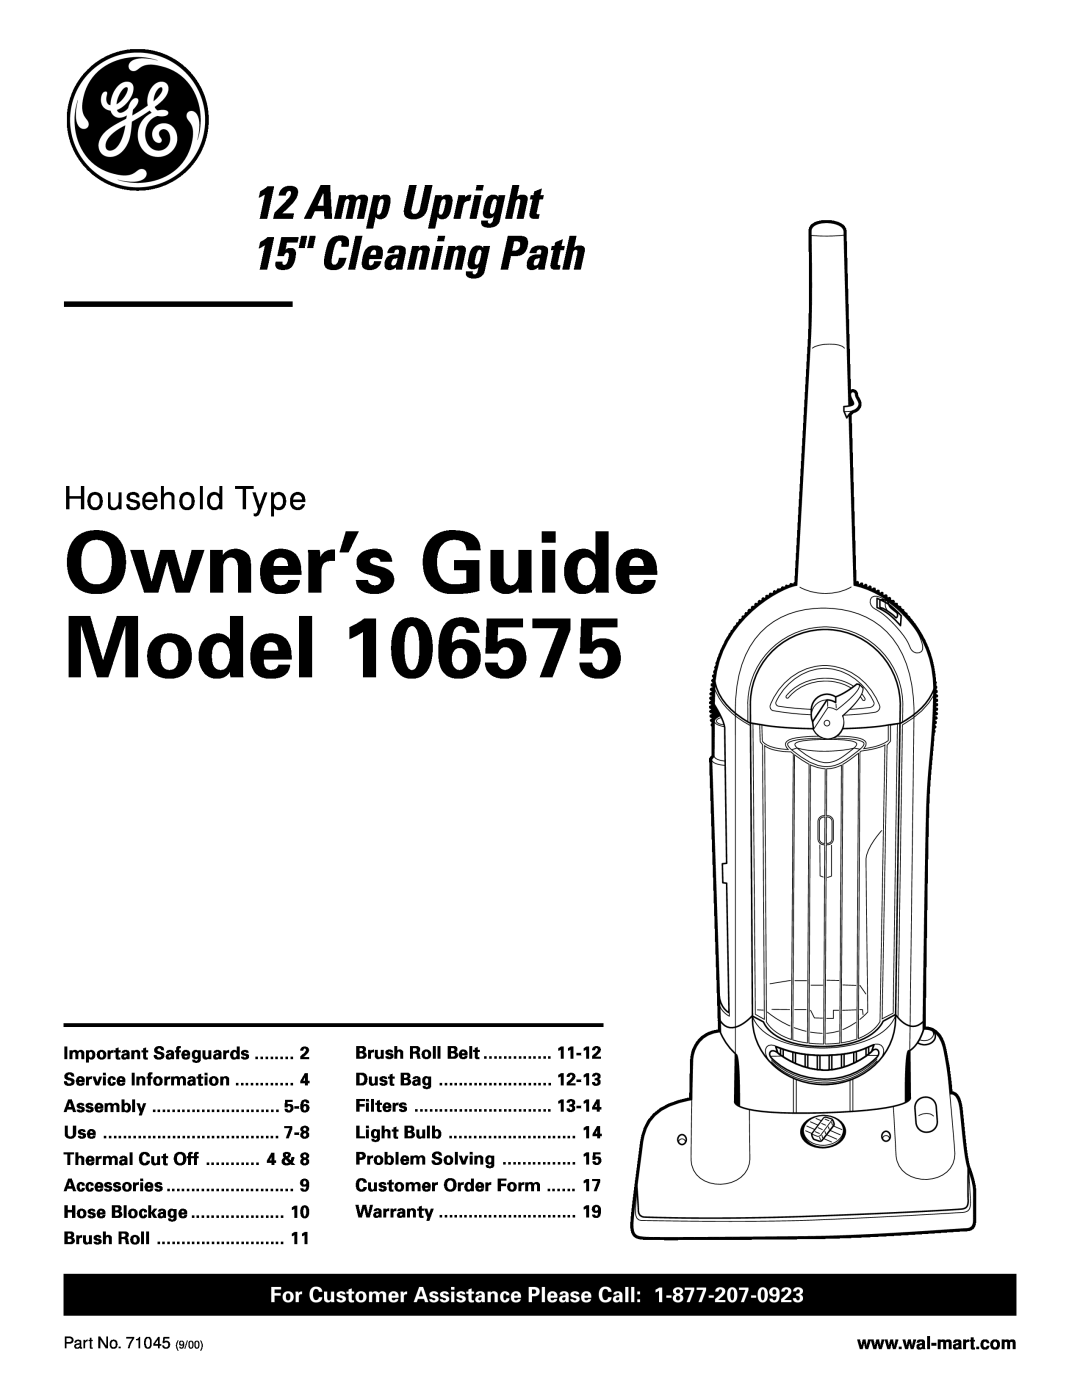 GE 106575 warranty Owner’s Guide Model, Household Type, For Customer Assistance Please Call, Important Safeguards, 11-12 